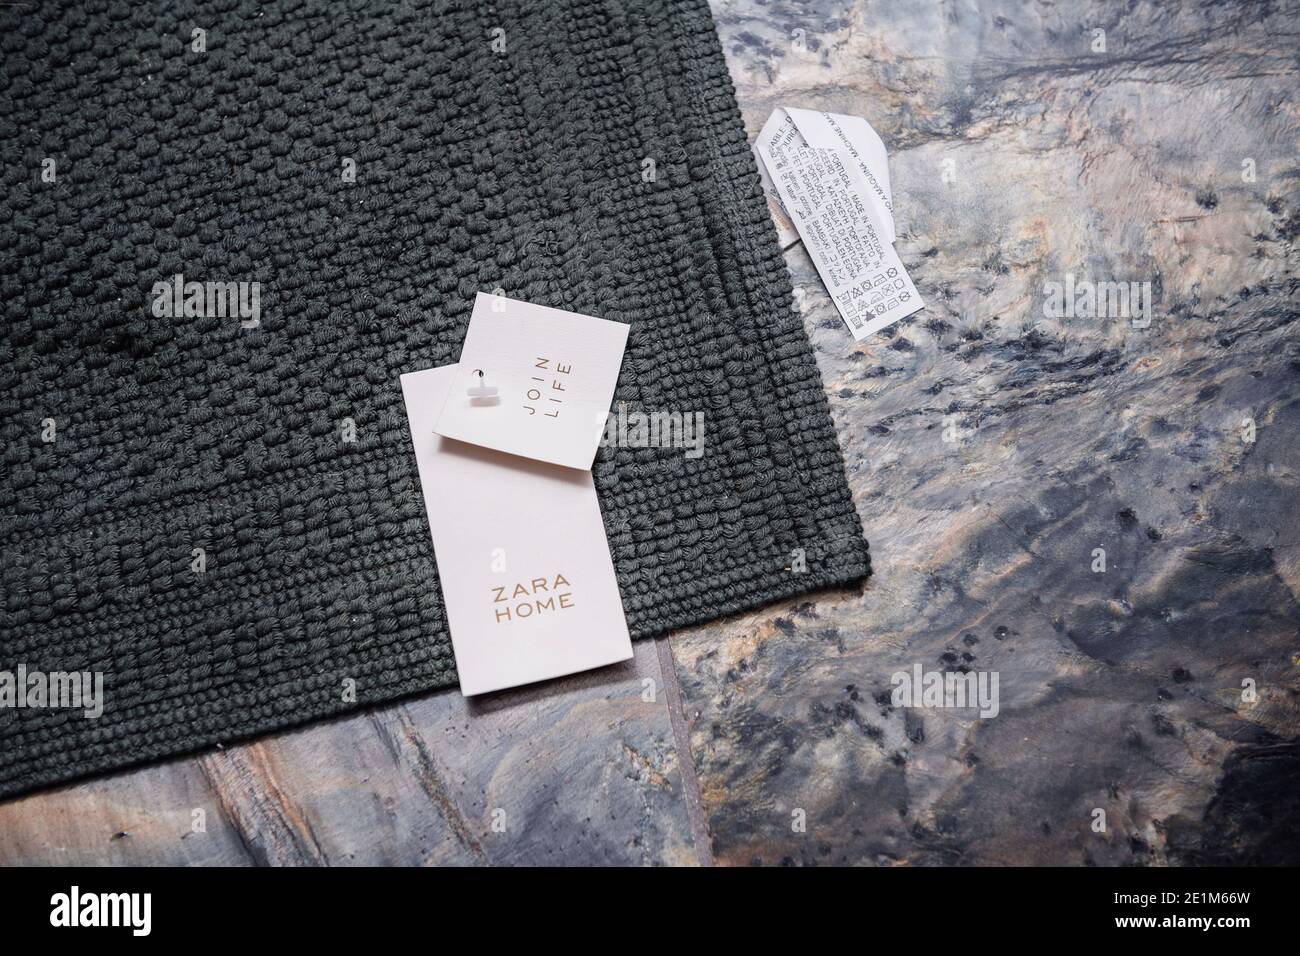 Paris, France - Dec 30, 2020: New luxury bathroom with join life collection Zara  Home floor textile rug on the luxury stone natural background Stock Photo -  Alamy